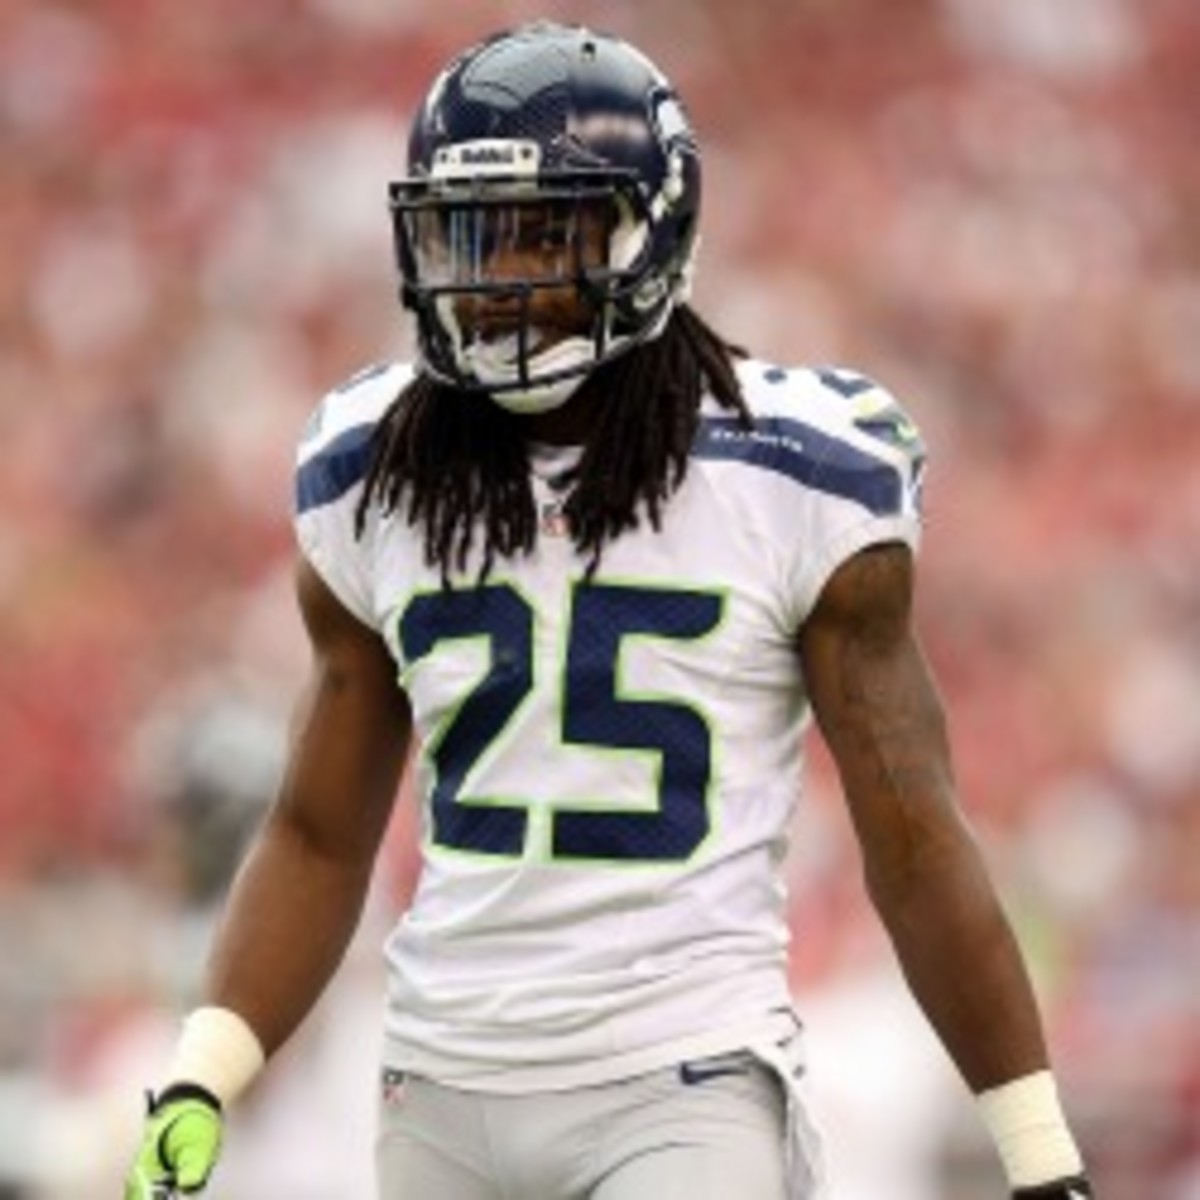 Seahawks cornerback Richard Sherman will reportedly have an appeal of his four-game suspension heard on Dec. 14. (Christian Petersen/Getty Images)